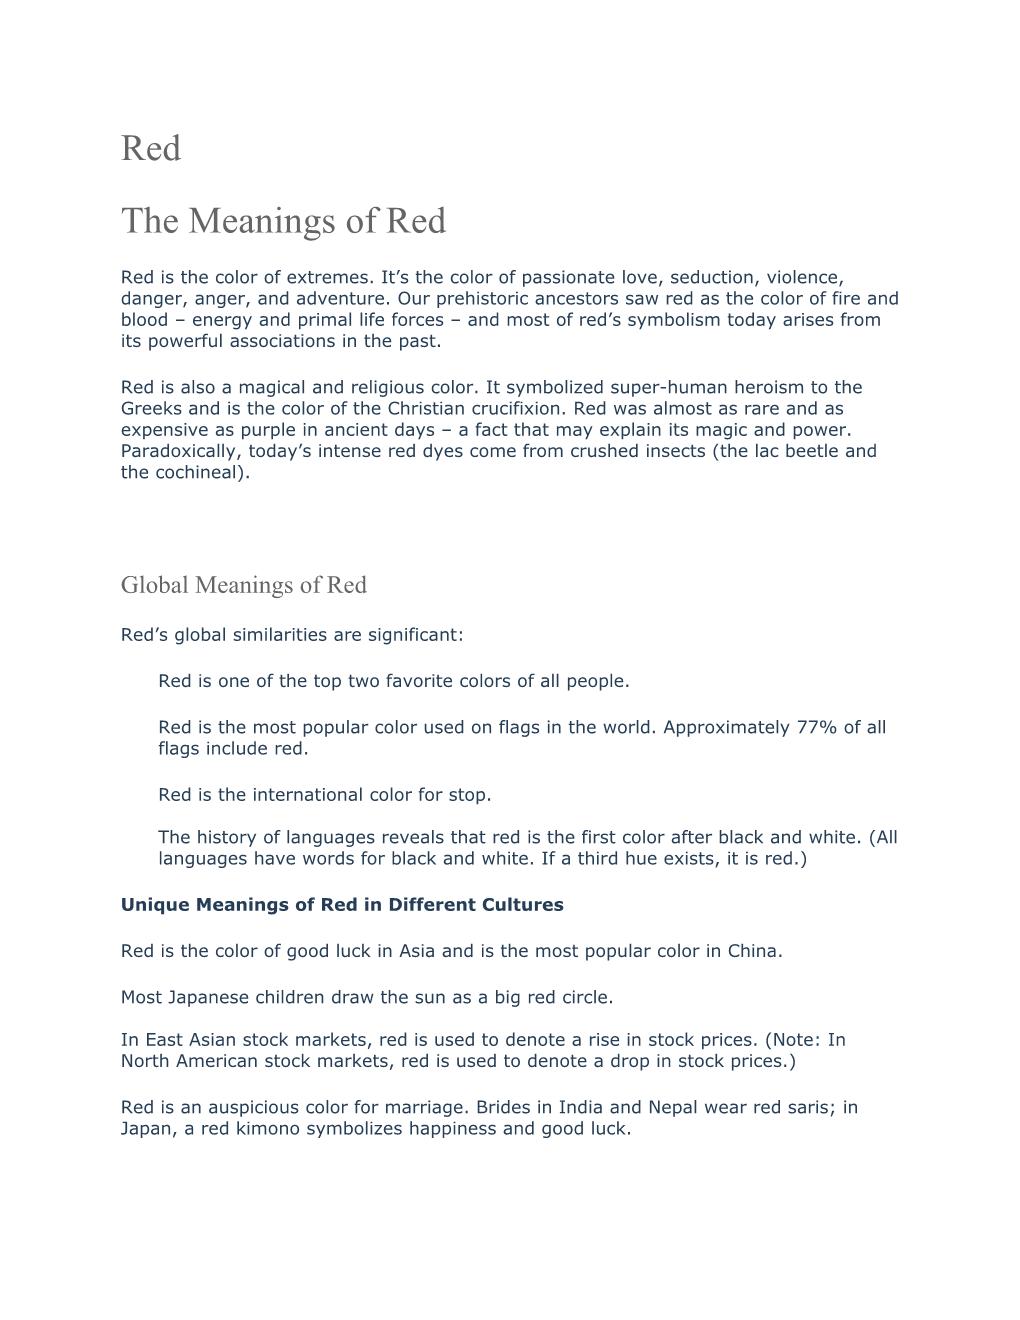 The Meanings of Red